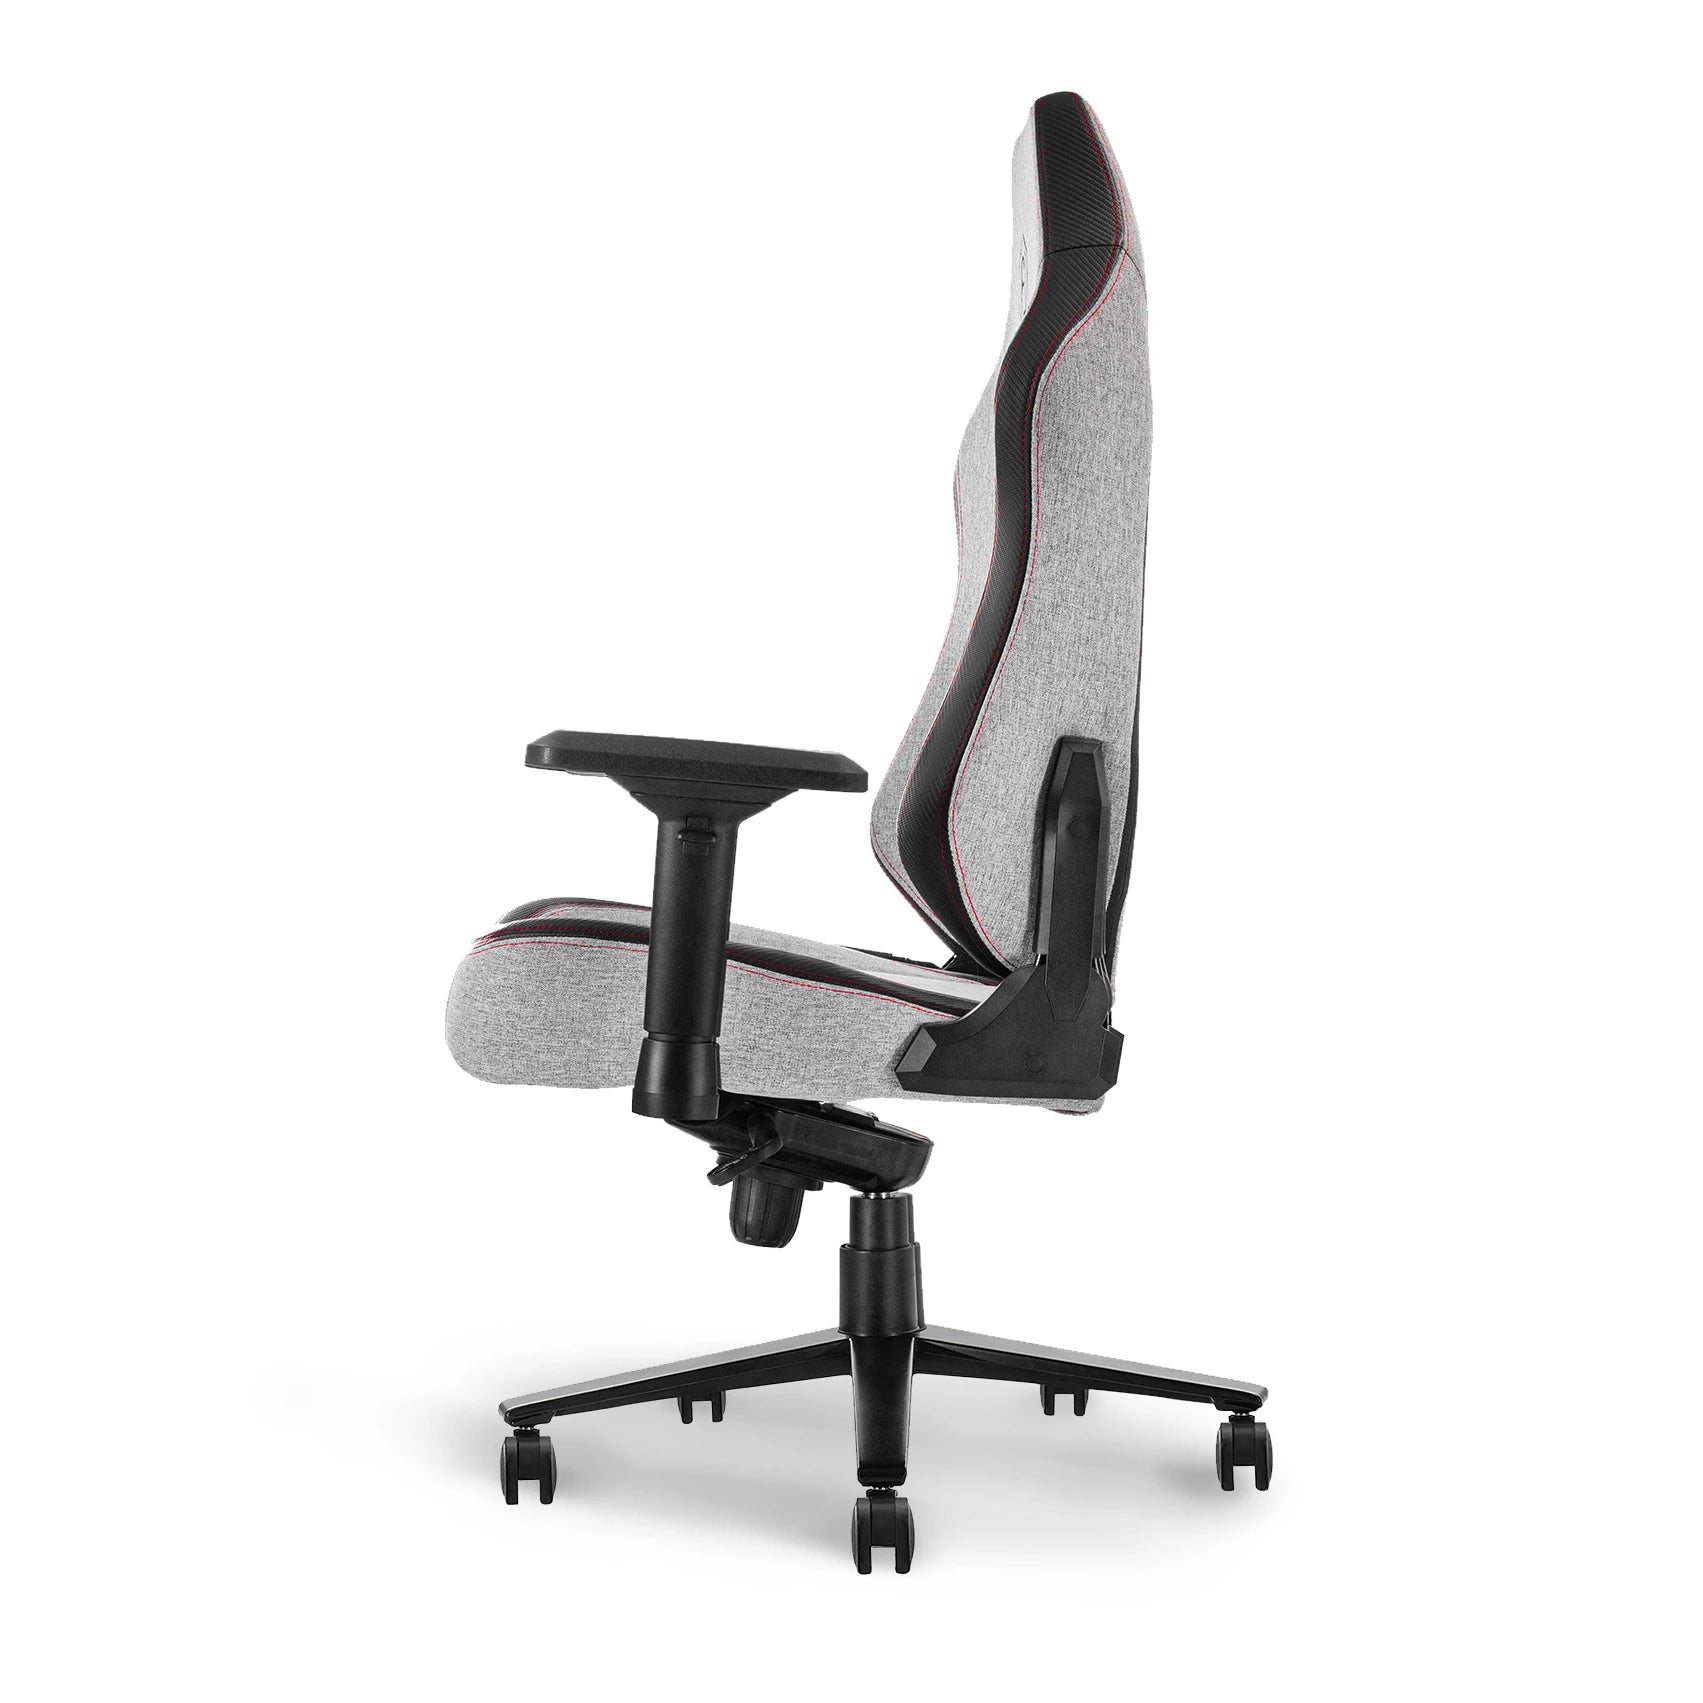 Greige Grey gaming chair side angle showcasing sleek lines and modern design.